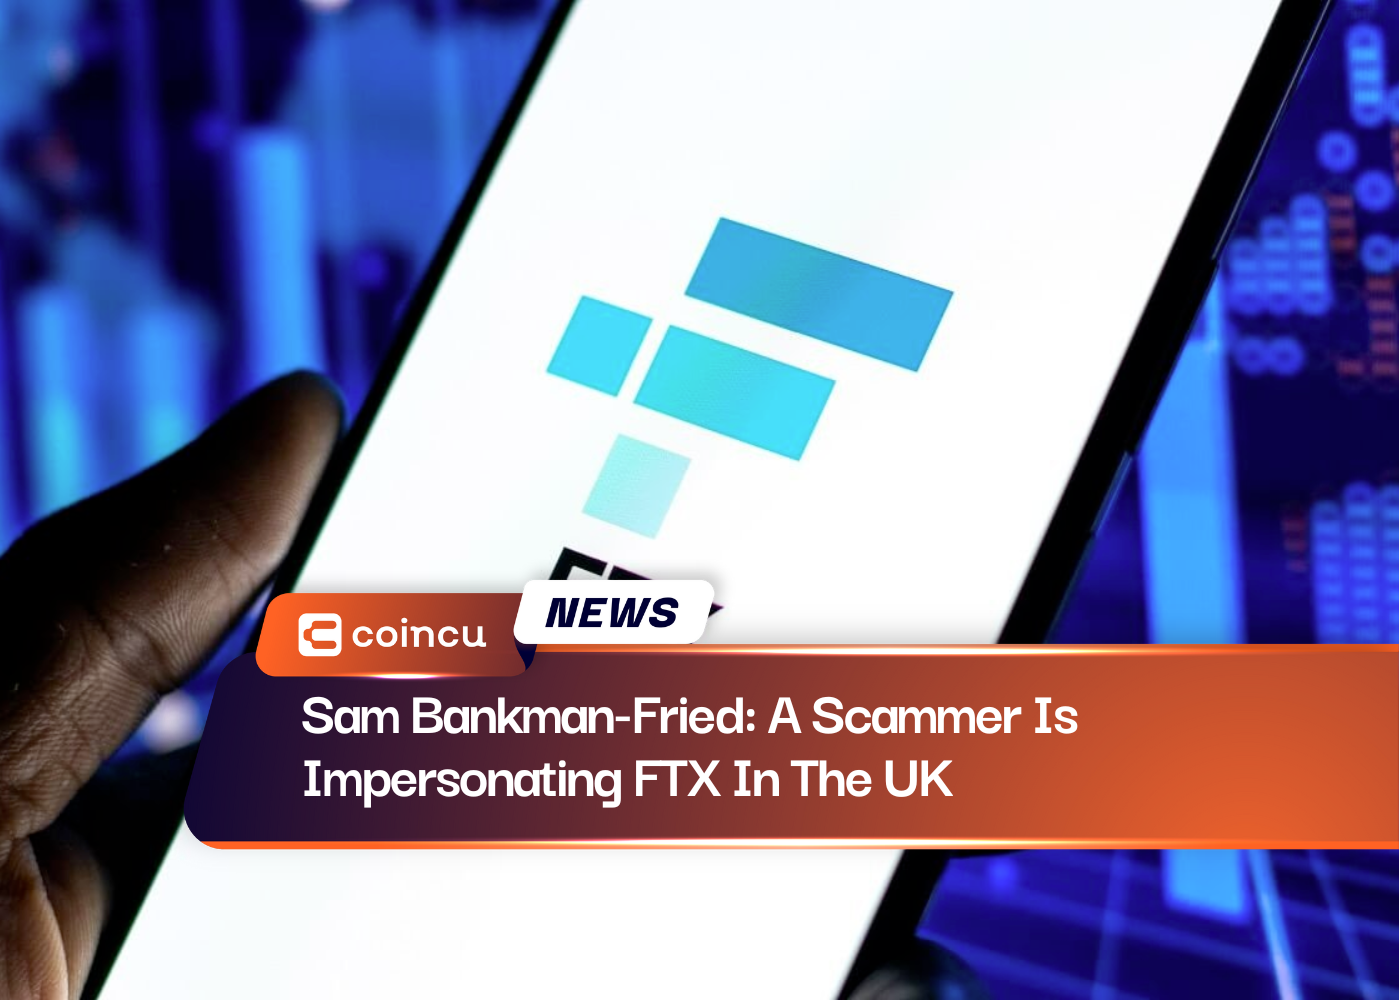 Sam Bankman-Fried: A Scammer Is Impersonating FTX In The UK